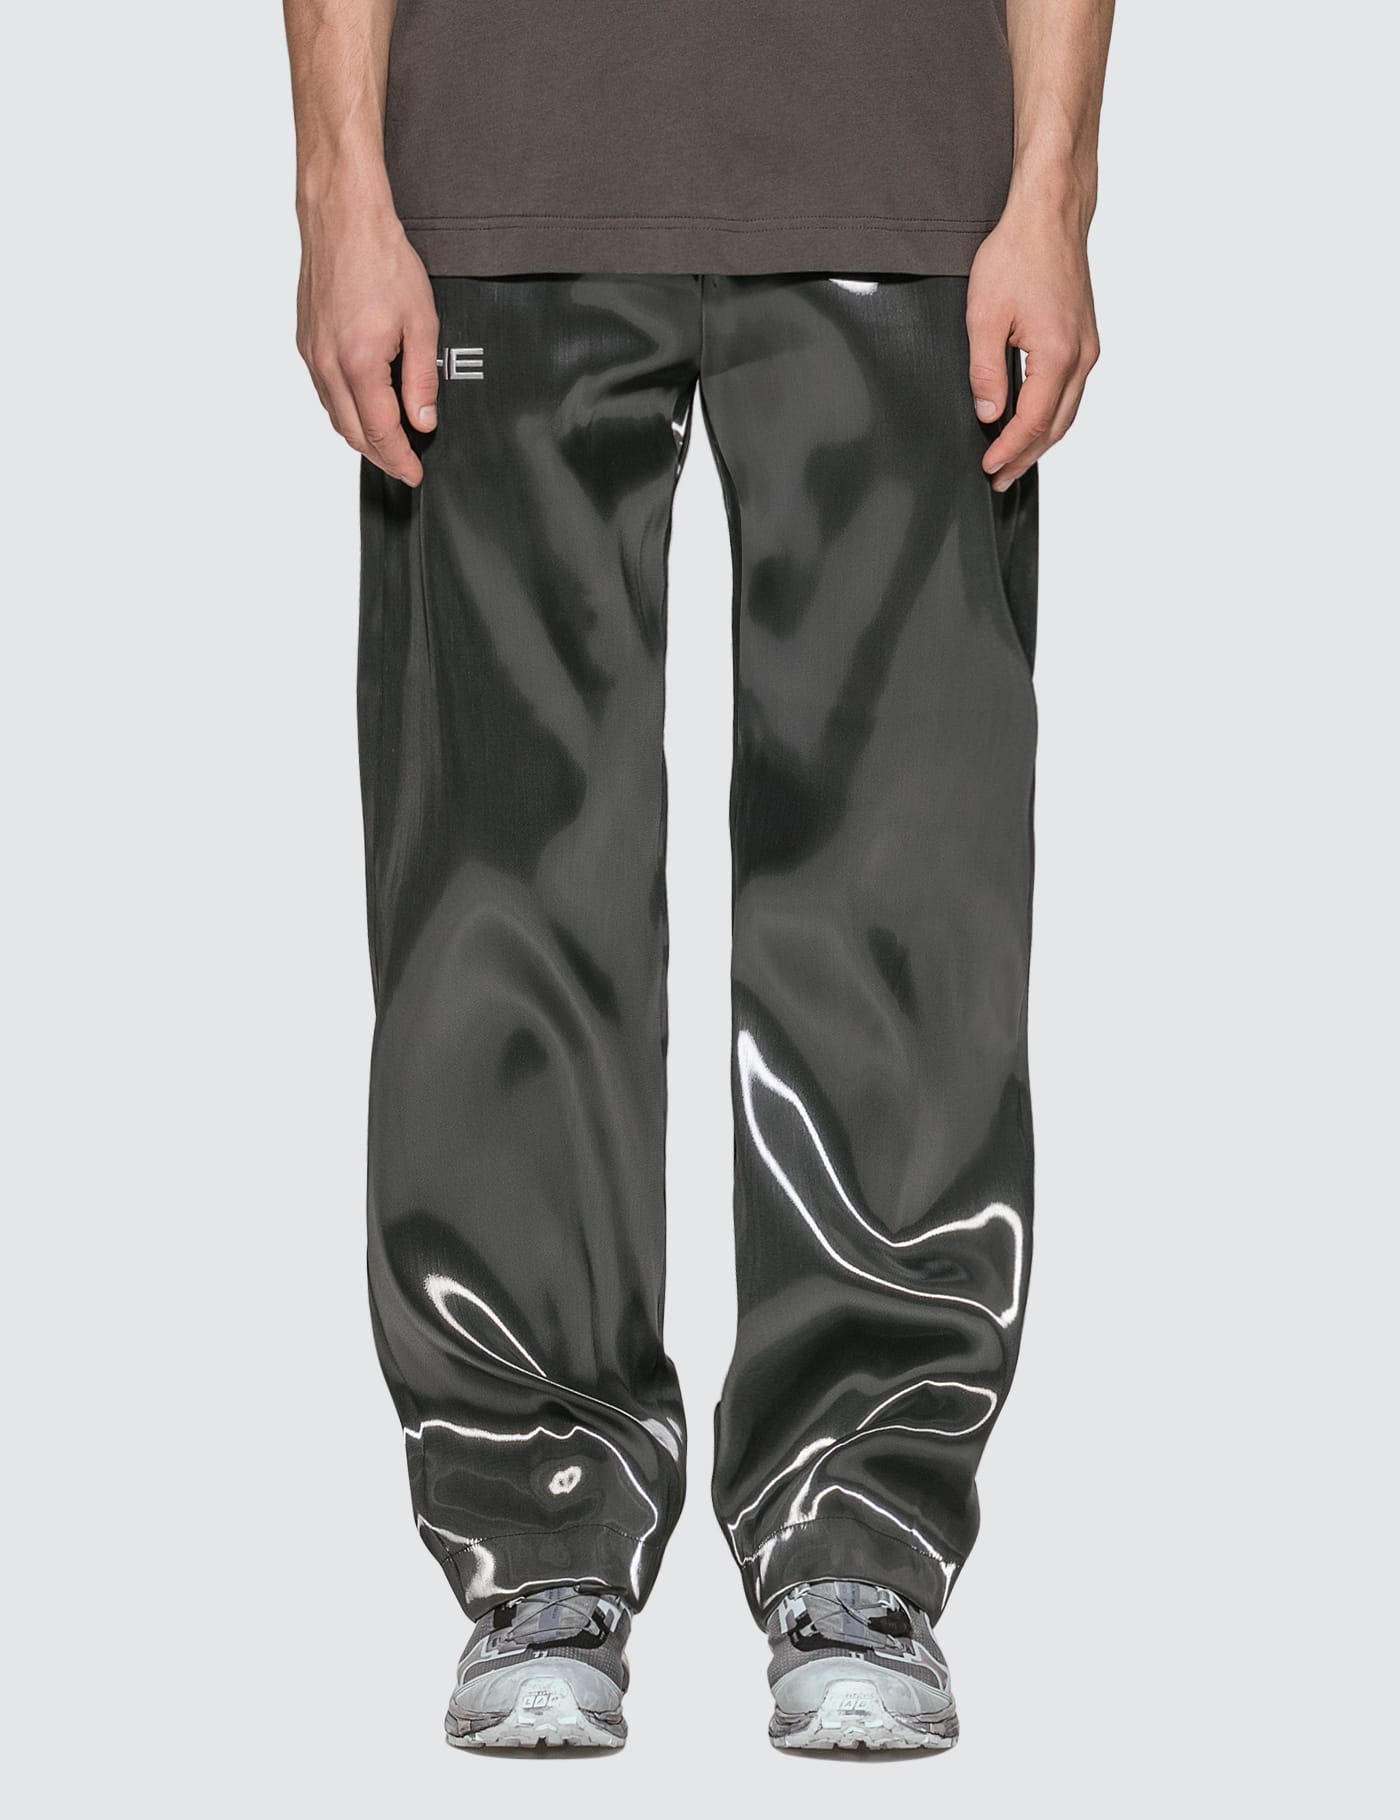 Heliot Emil - Liquid Metal Suit Pants | HBX - Globally Curated 